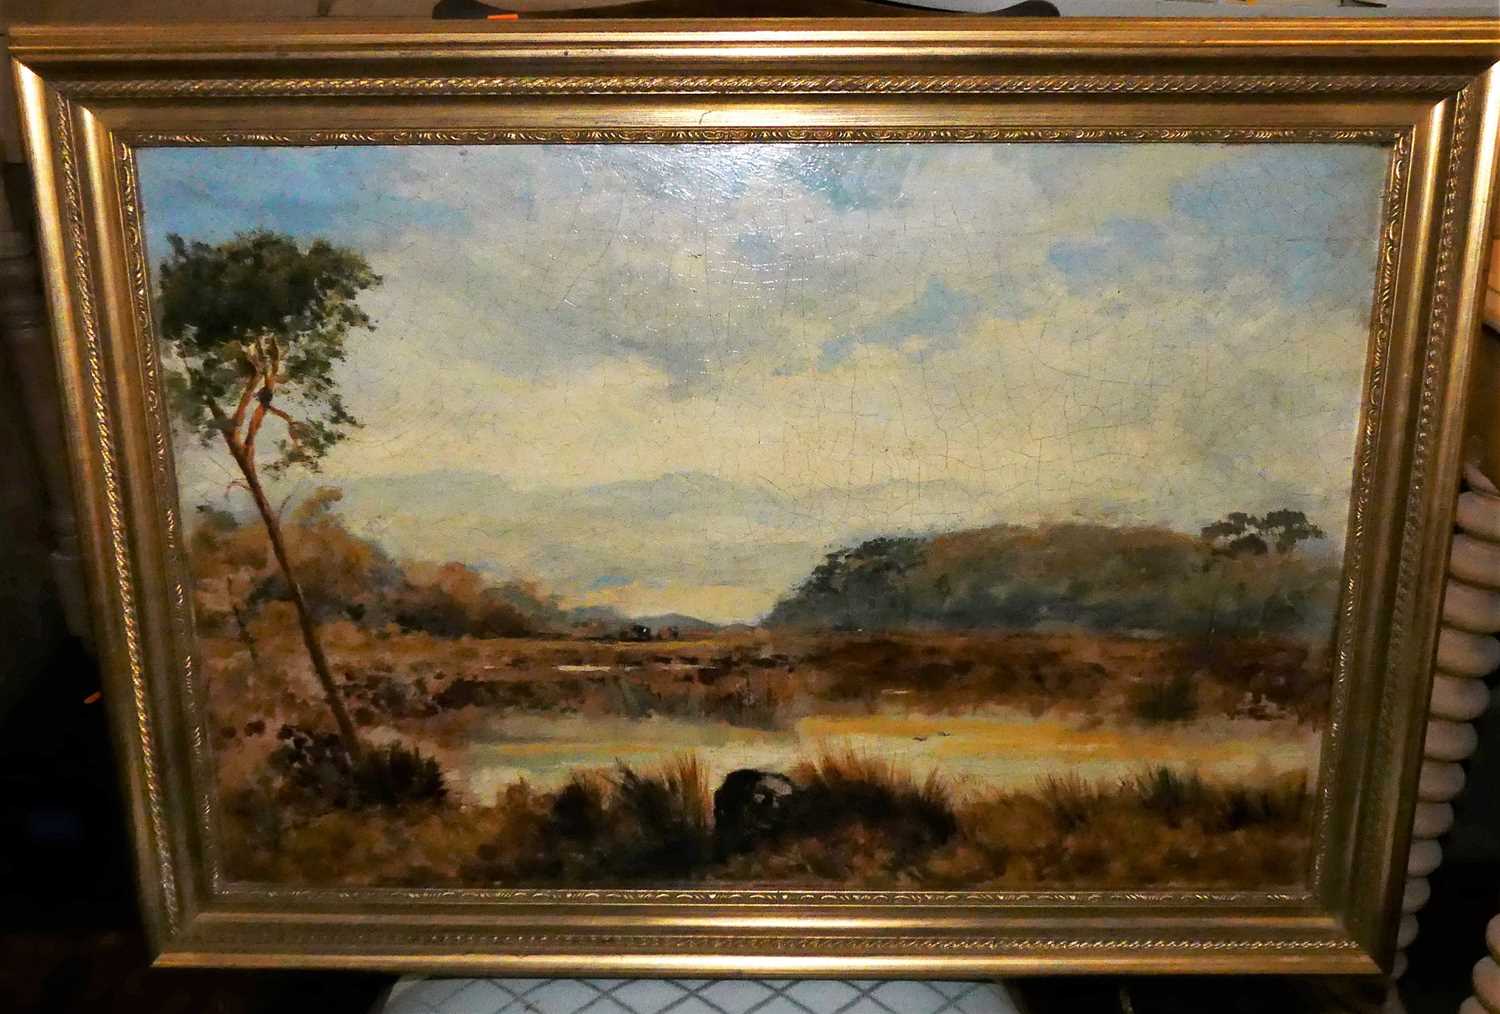 John Webb - River landscape, oil on canvas, signed lower right (with patch repairs and